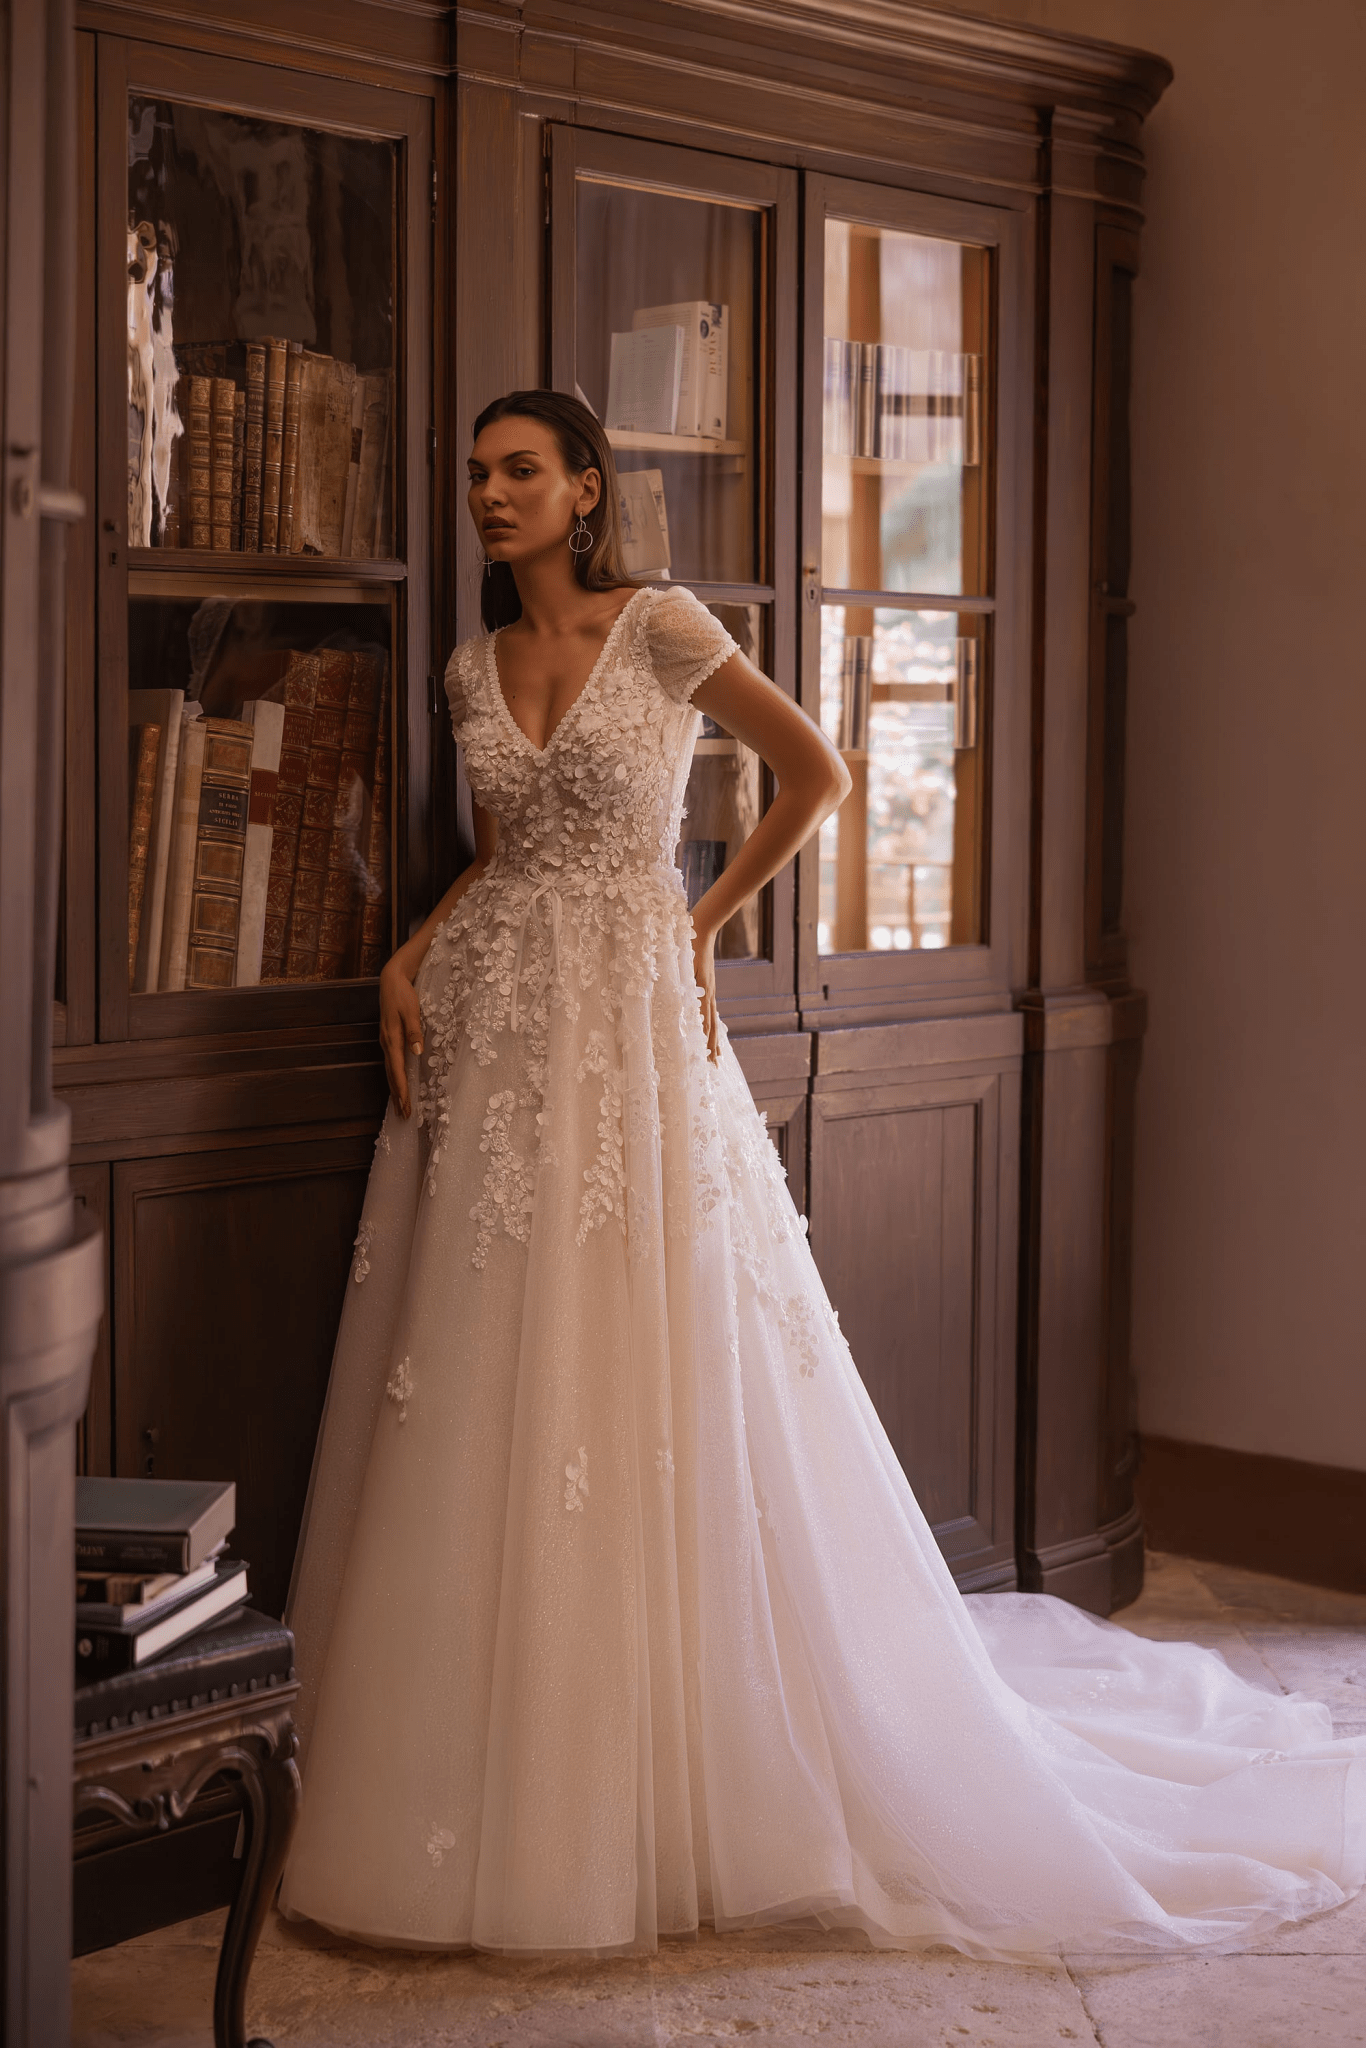 Floral Wedding Dress with V-Neck - Elegant Wedding Dress with Lace Detail and Extended Train Plus Size - WonderlandByLilian